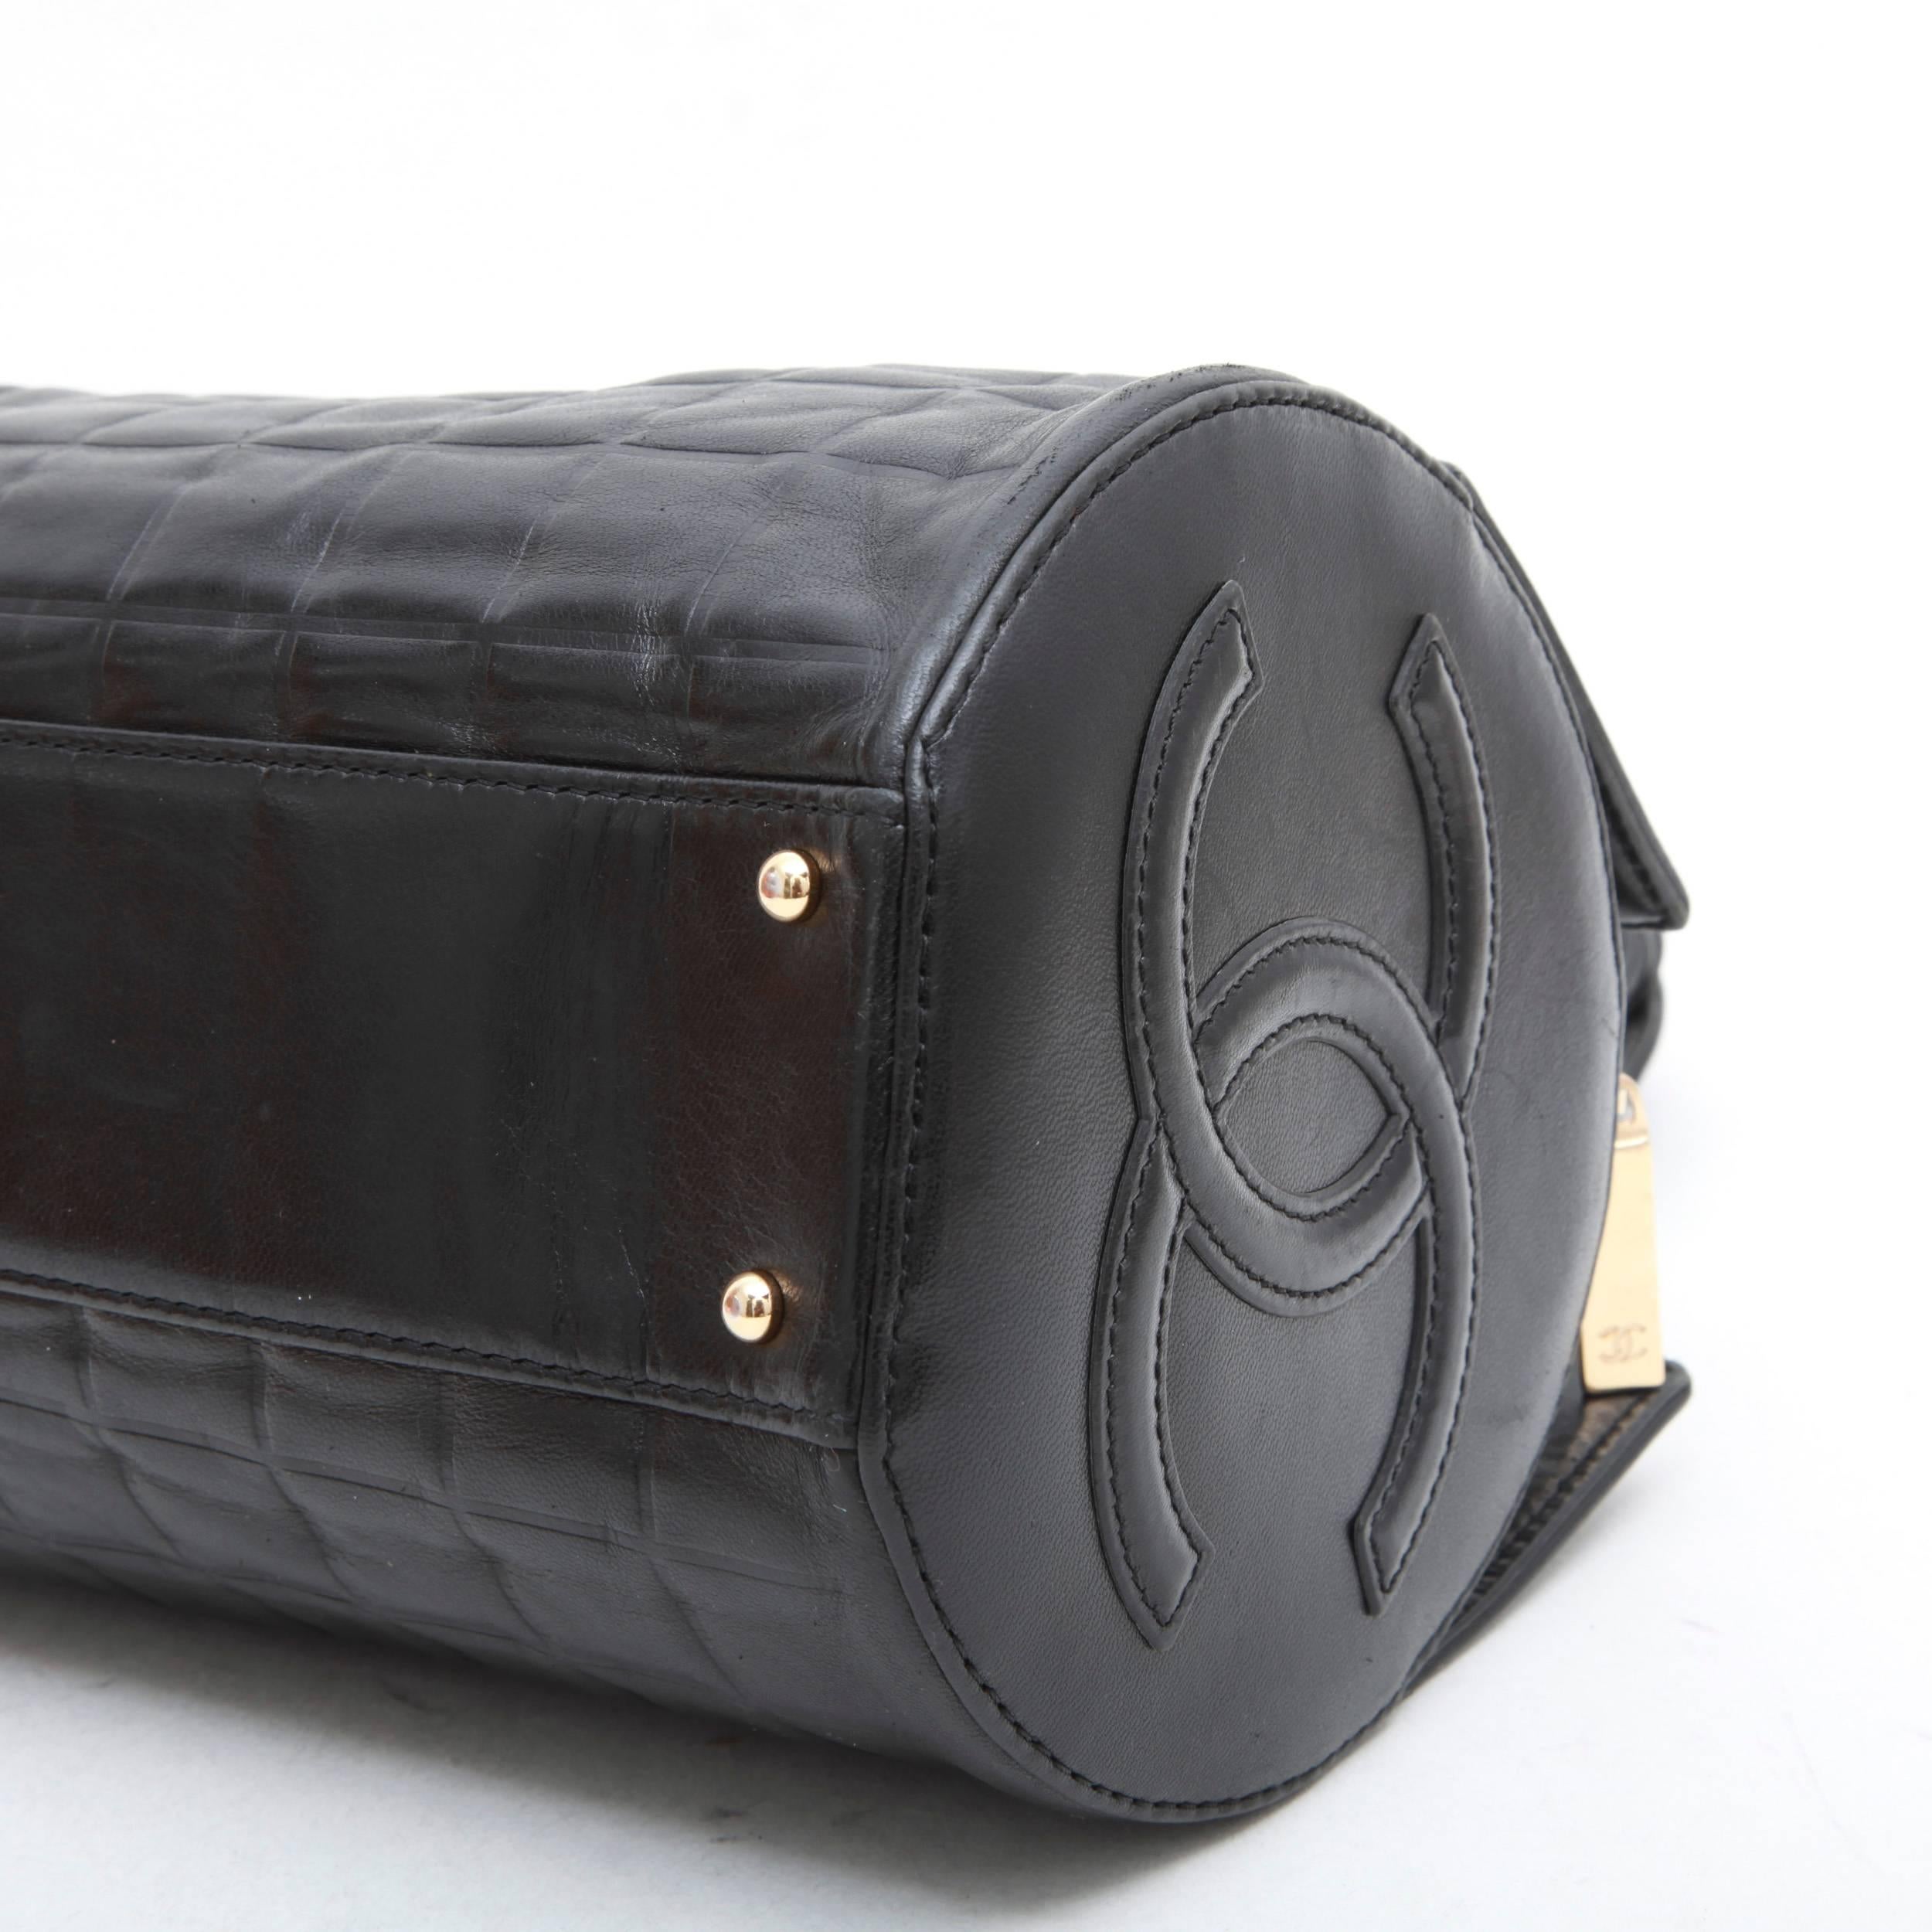 CHANEL Bag in Black Quilted Smooth Lamb Leather 2